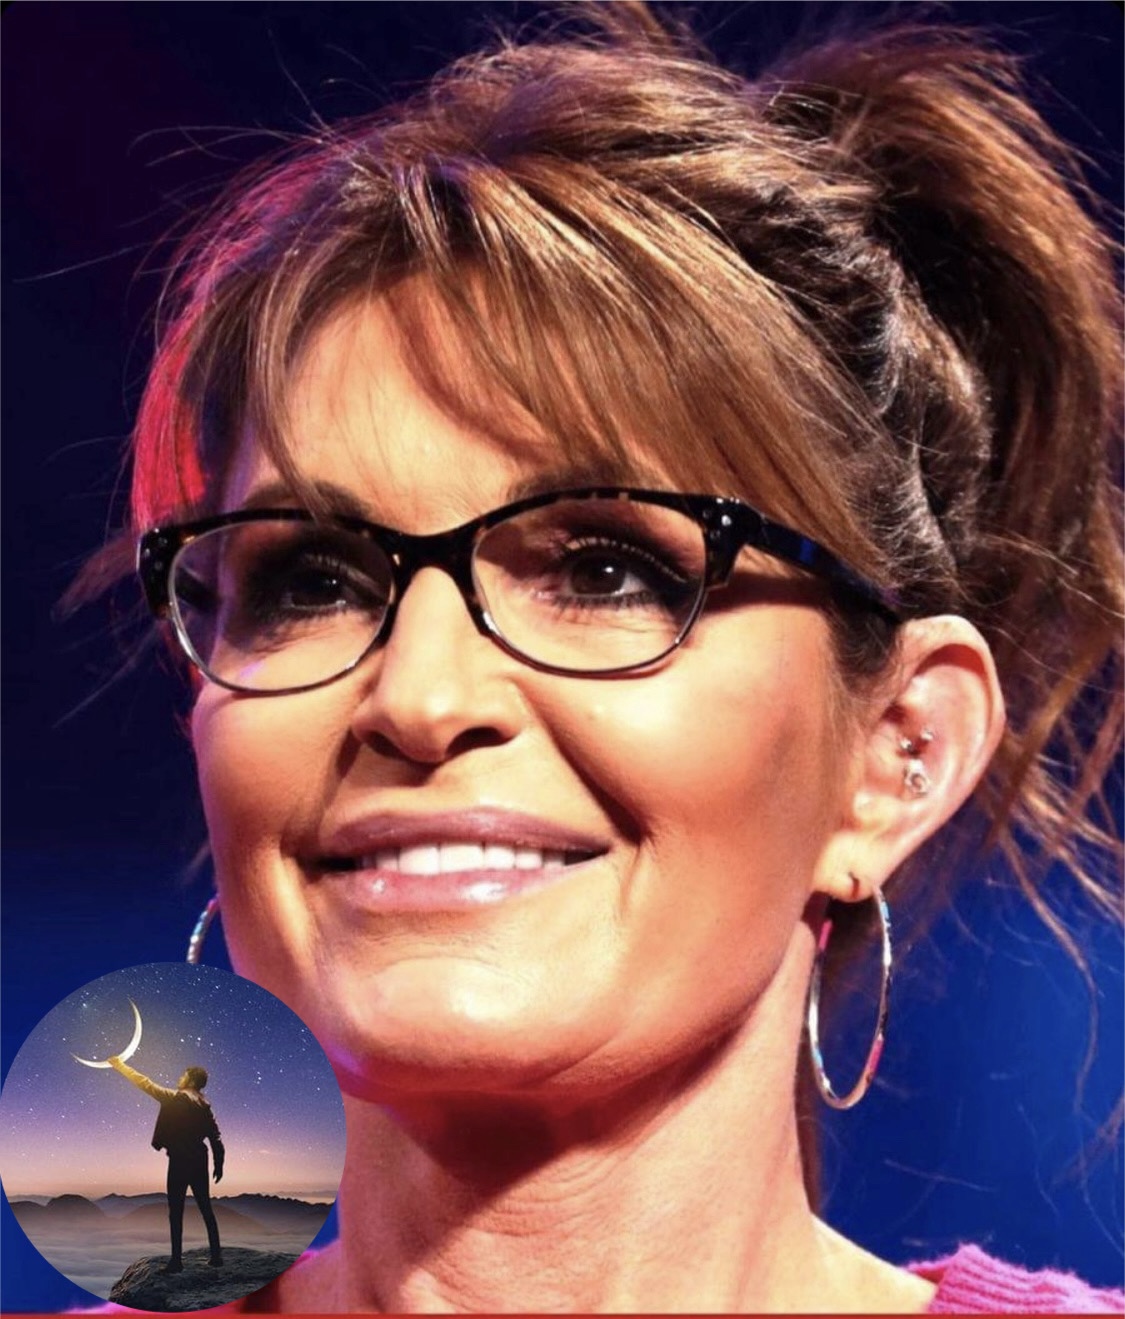 Sarah Palin Discusses a New Romance, Divorce, and Running for Congress